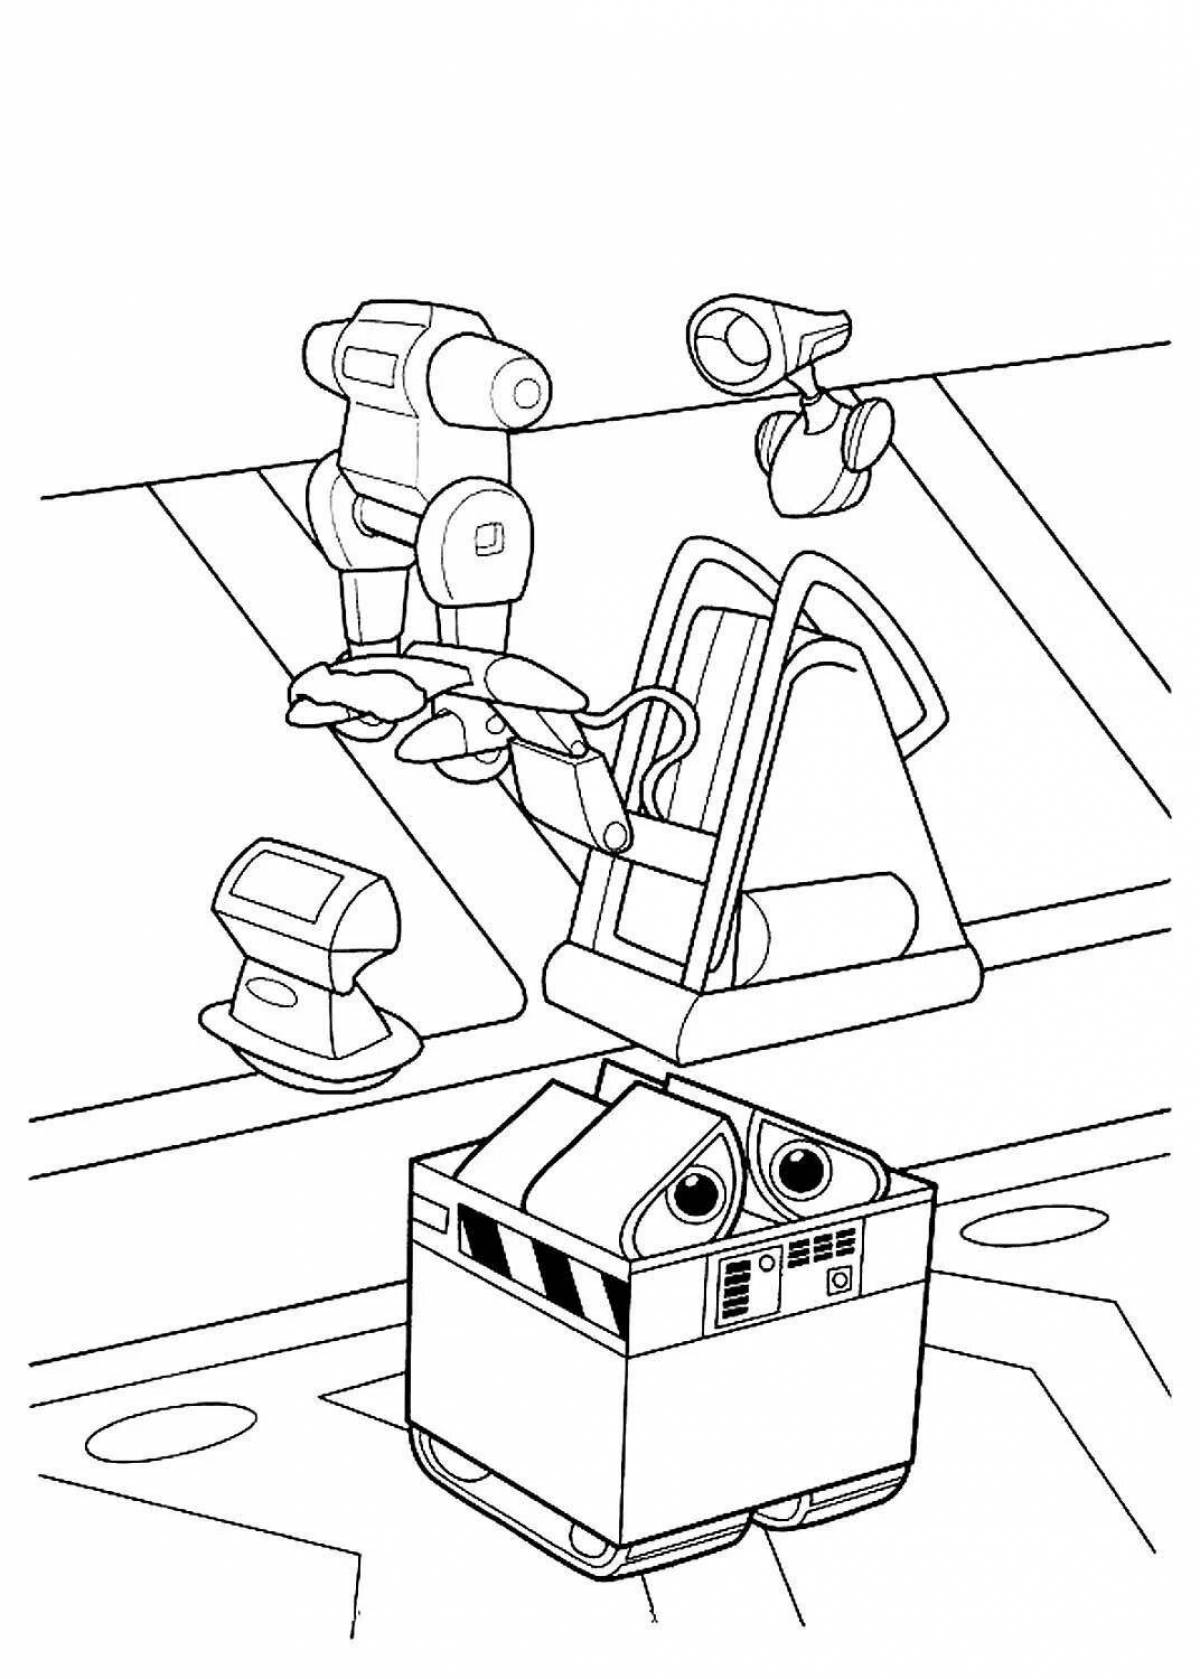 Glittering robot valley coloring page